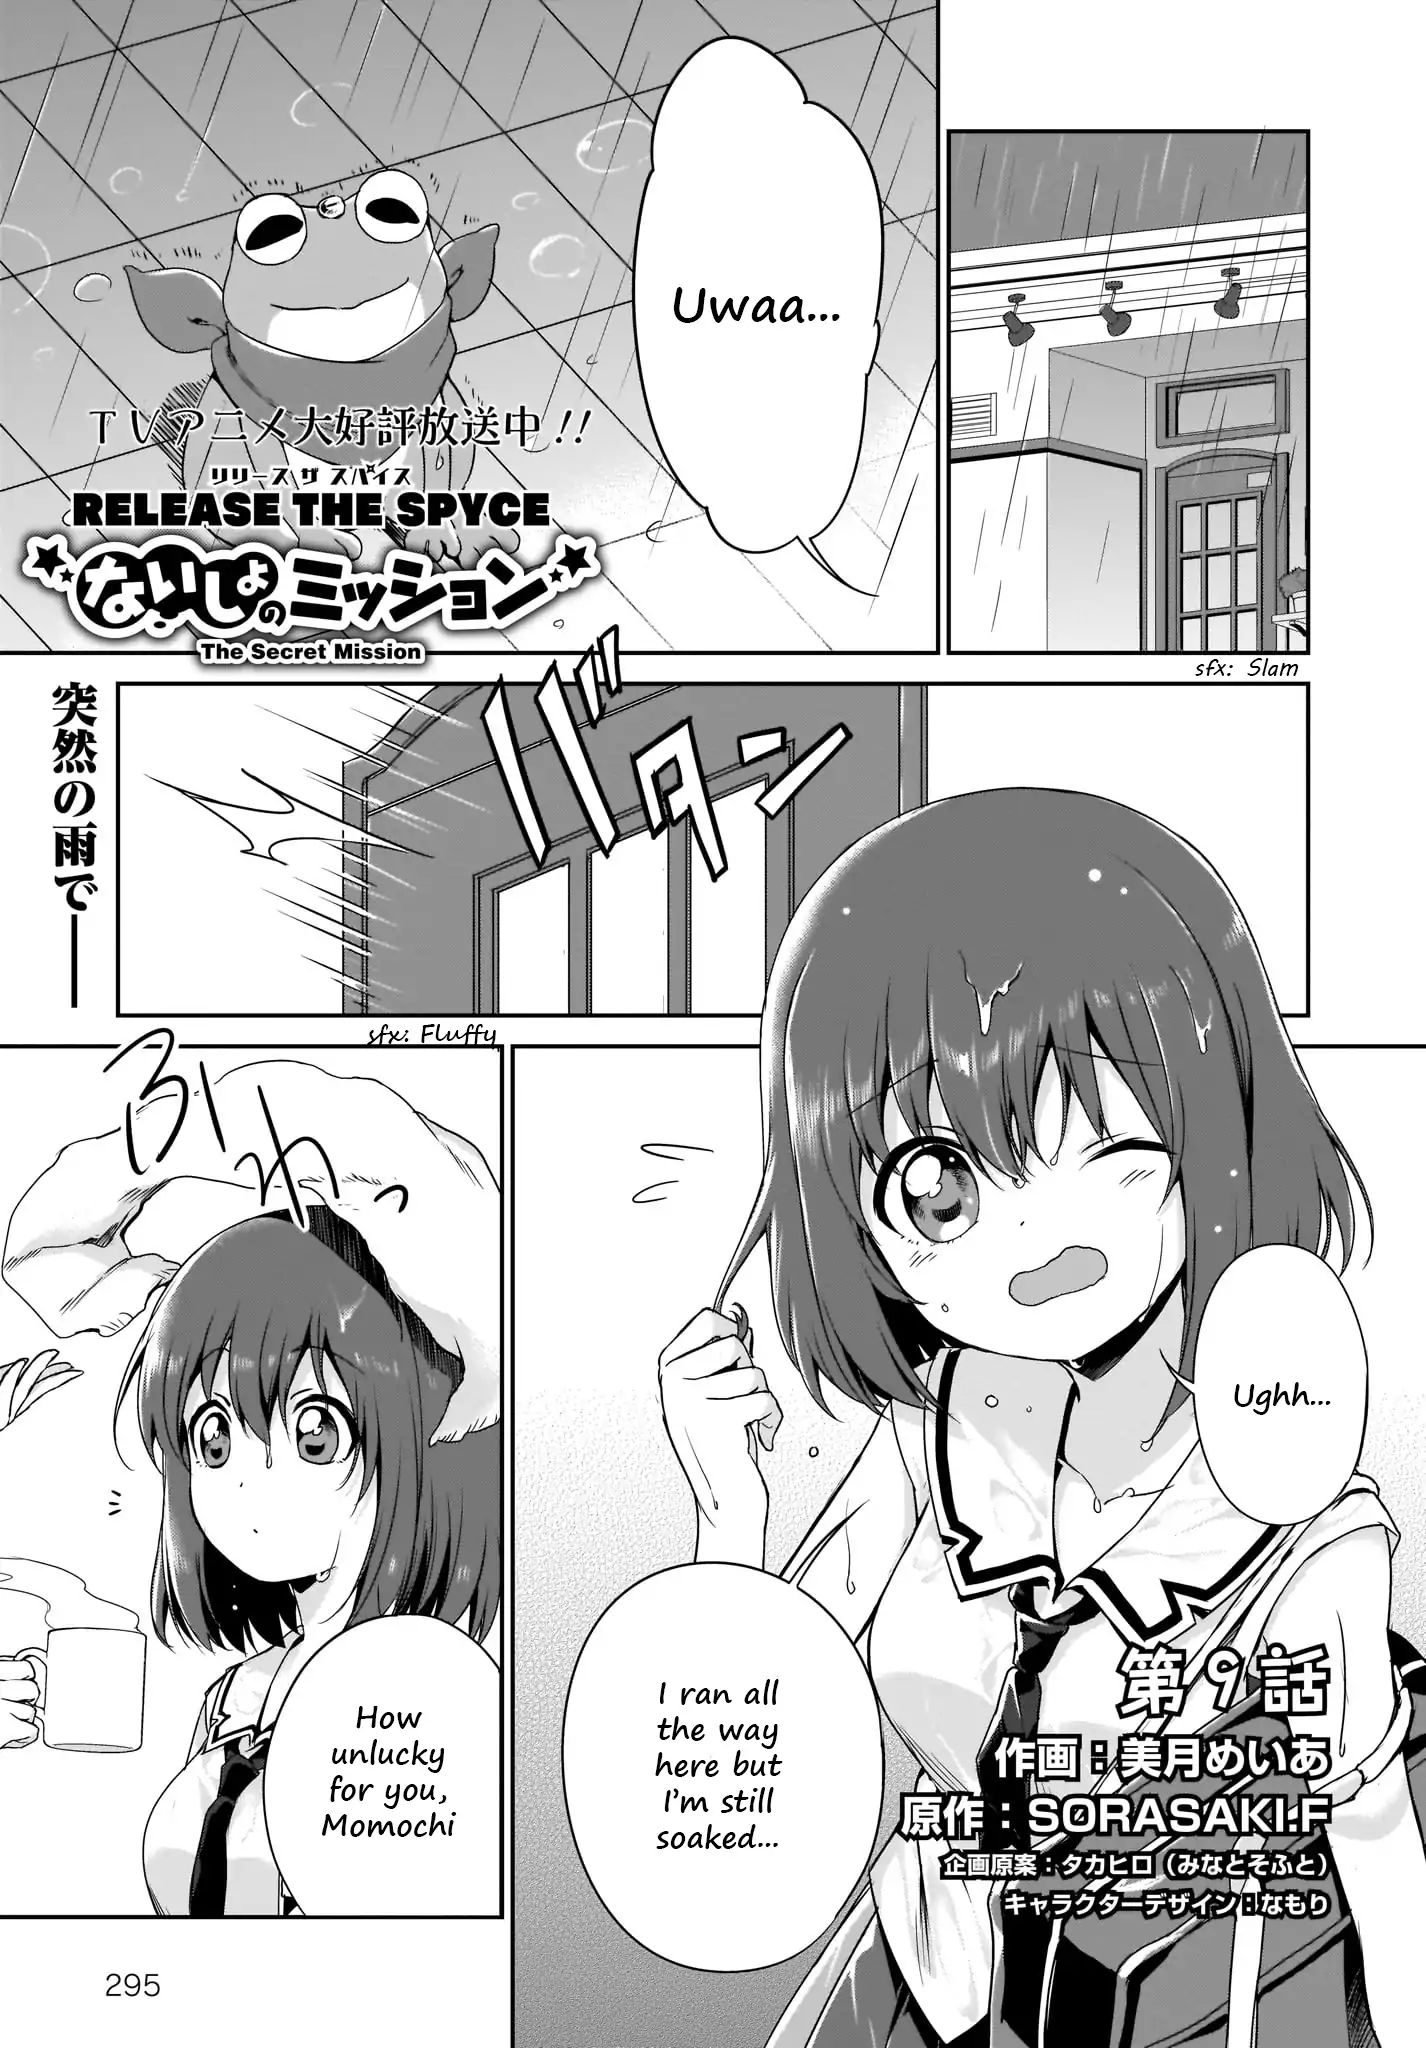 Release The Spyce - Secret Mission - Page 1